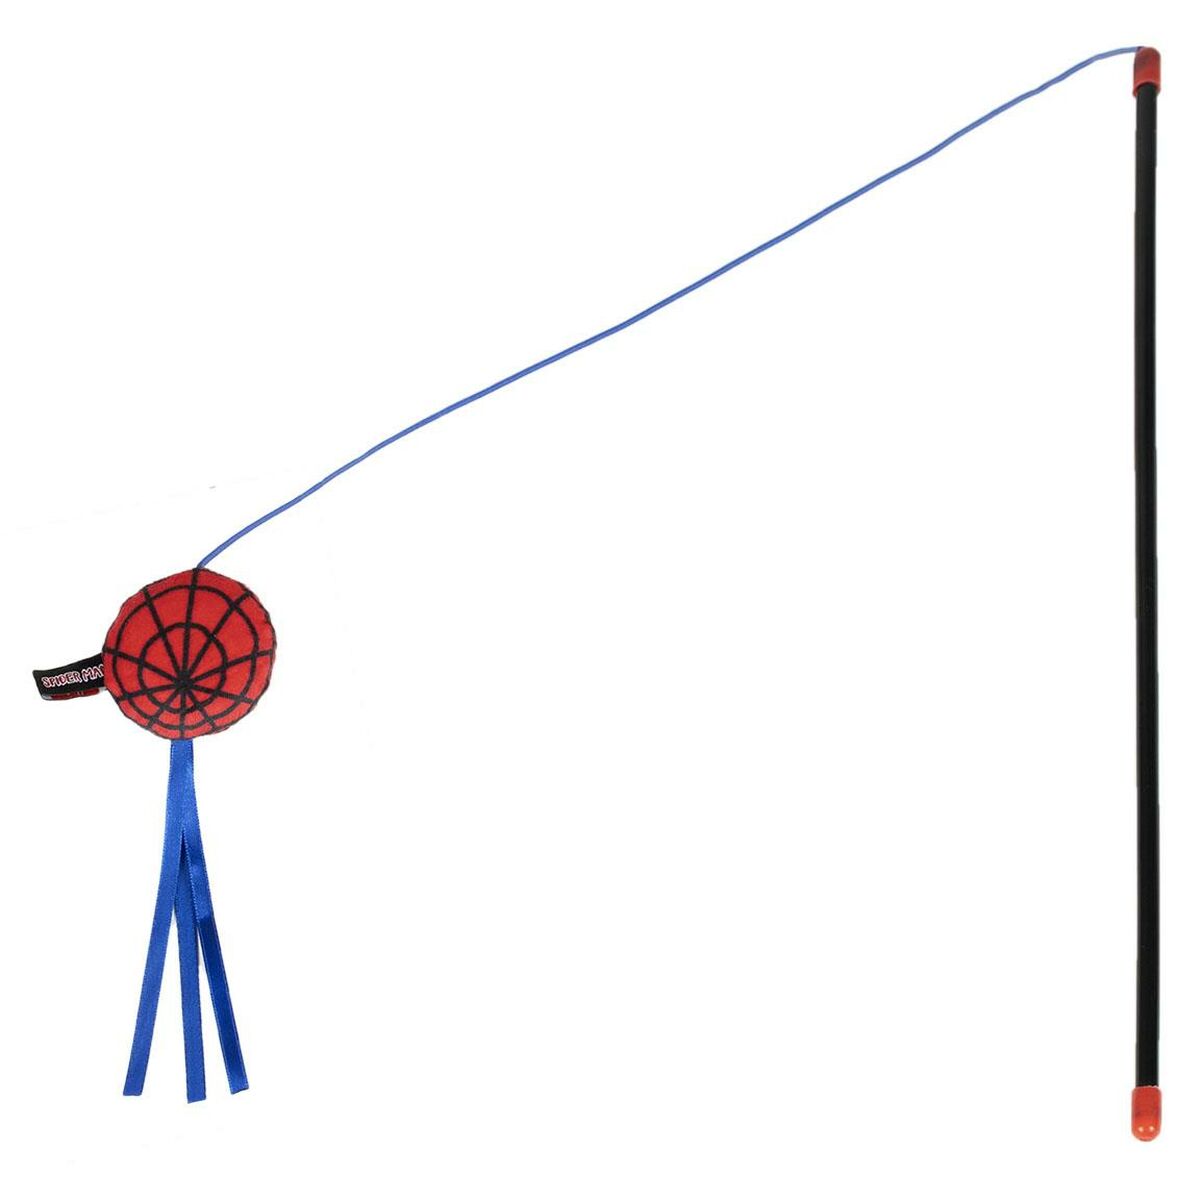 Cat toy Spiderman Red